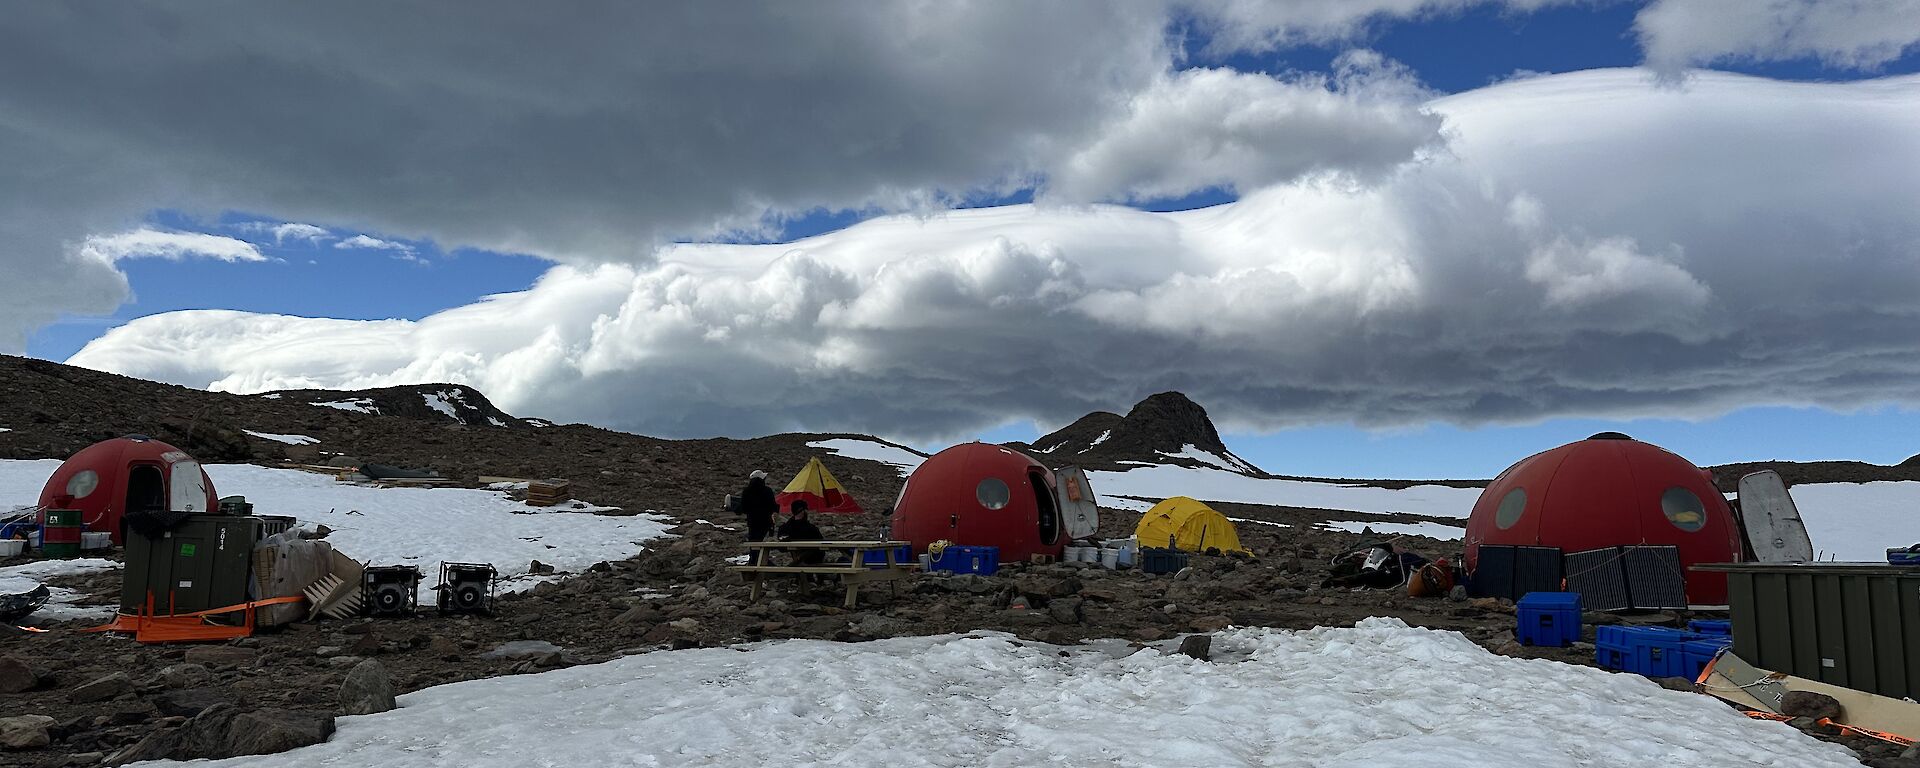 four round red tents stand on ice, with a few yellow normal tents between them